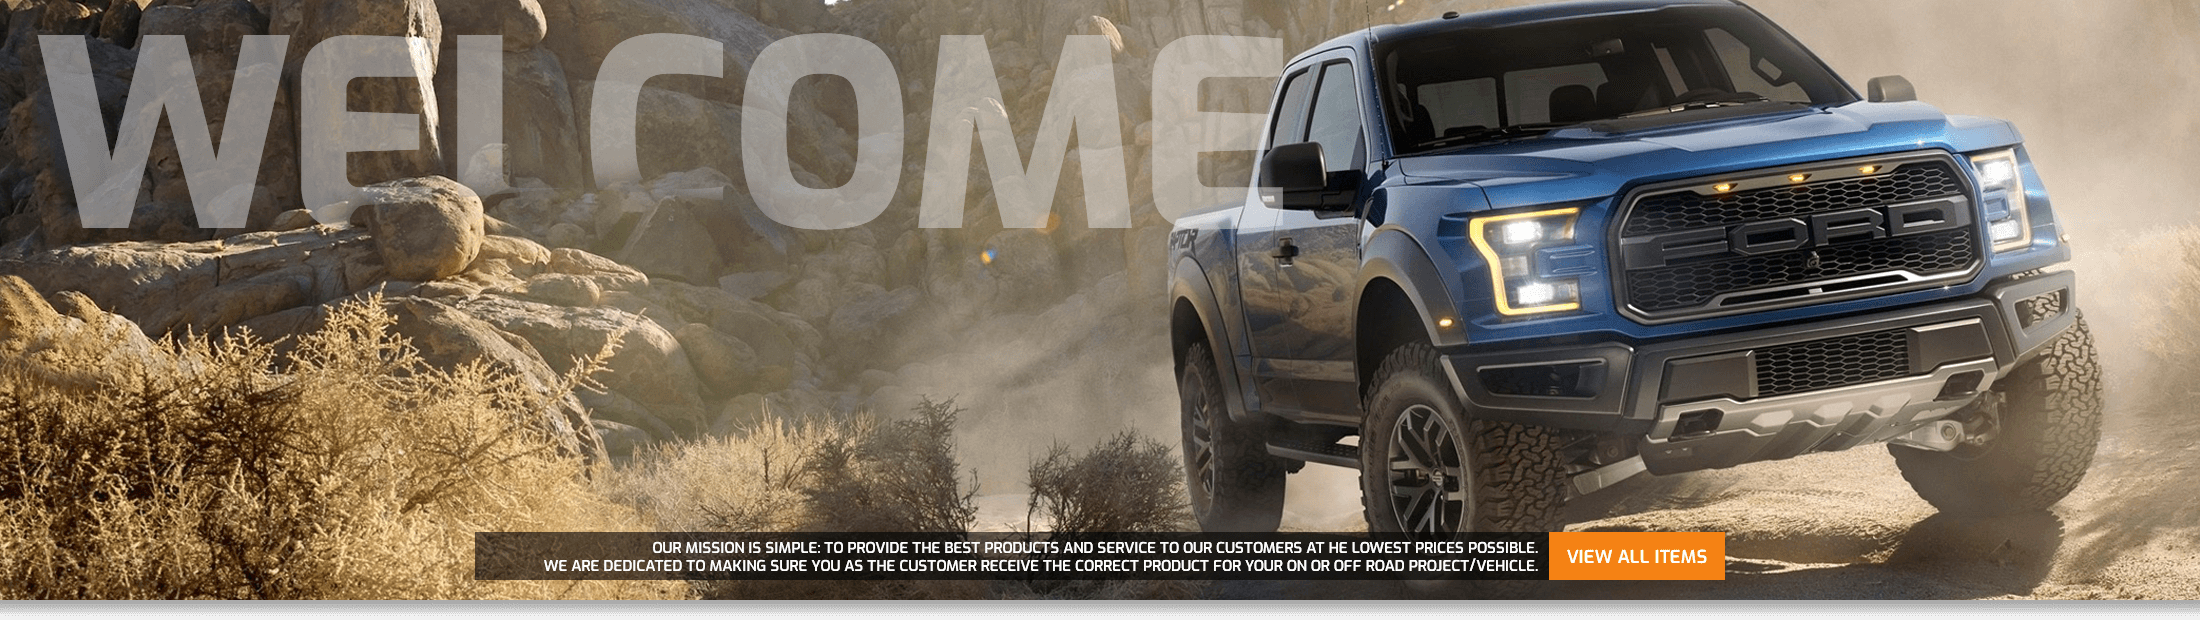 Our Mission is simple: To provide the best products and service to our customers at he lowest prices possible. - We are dedicated to making sure you as the customer receive the correct product for your on or off road project/vehicle. - View All Item